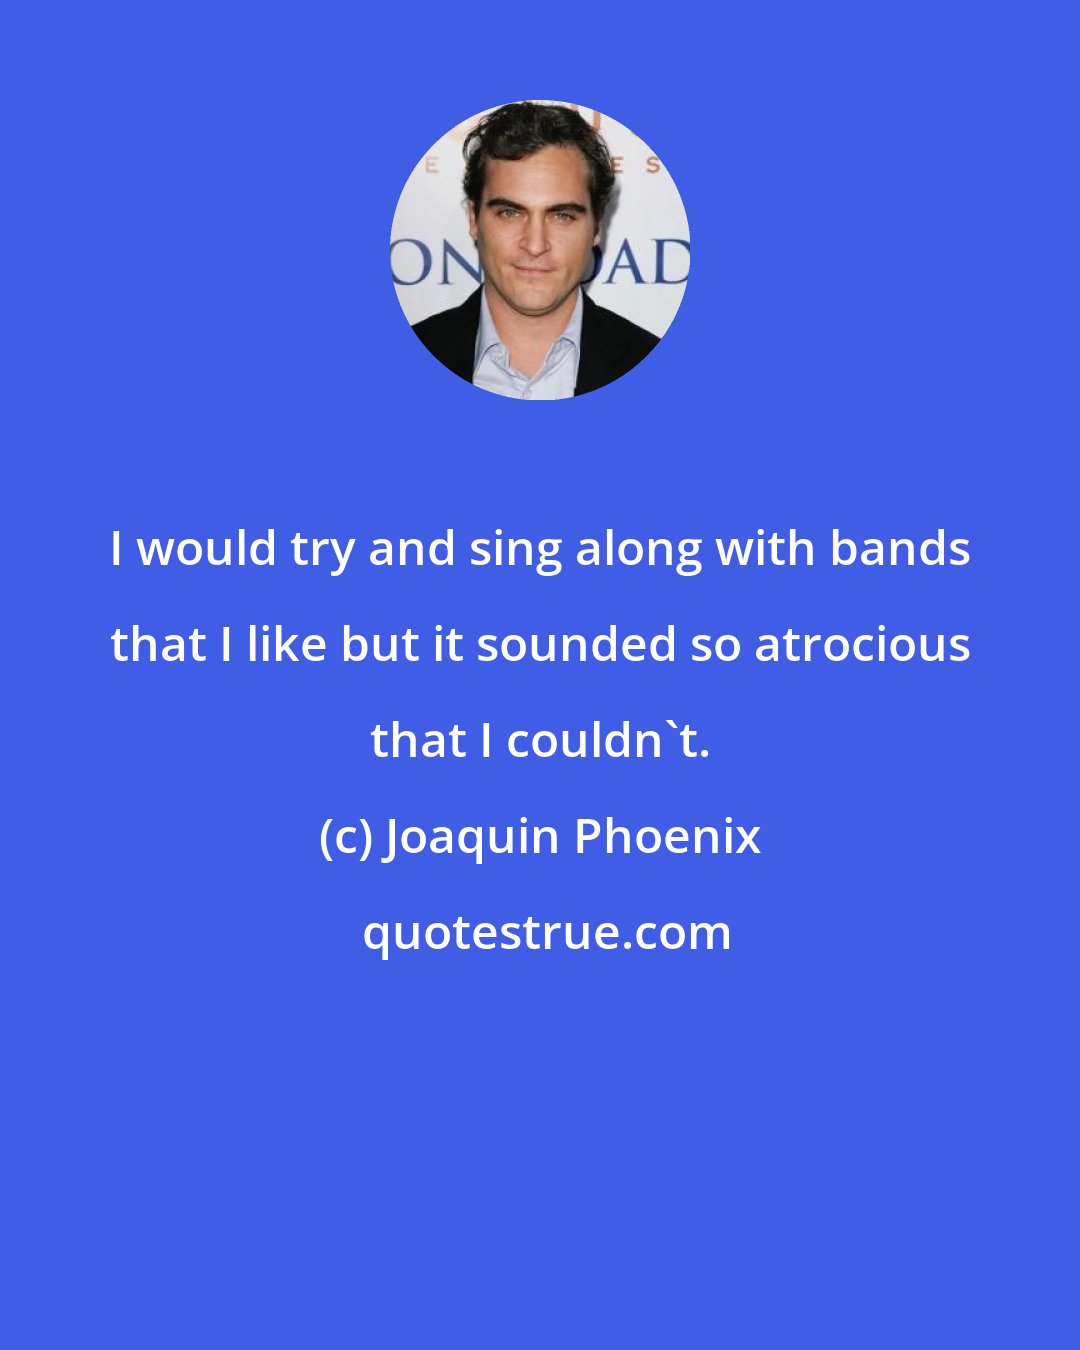 Joaquin Phoenix: I would try and sing along with bands that I like but it sounded so atrocious that I couldn't.